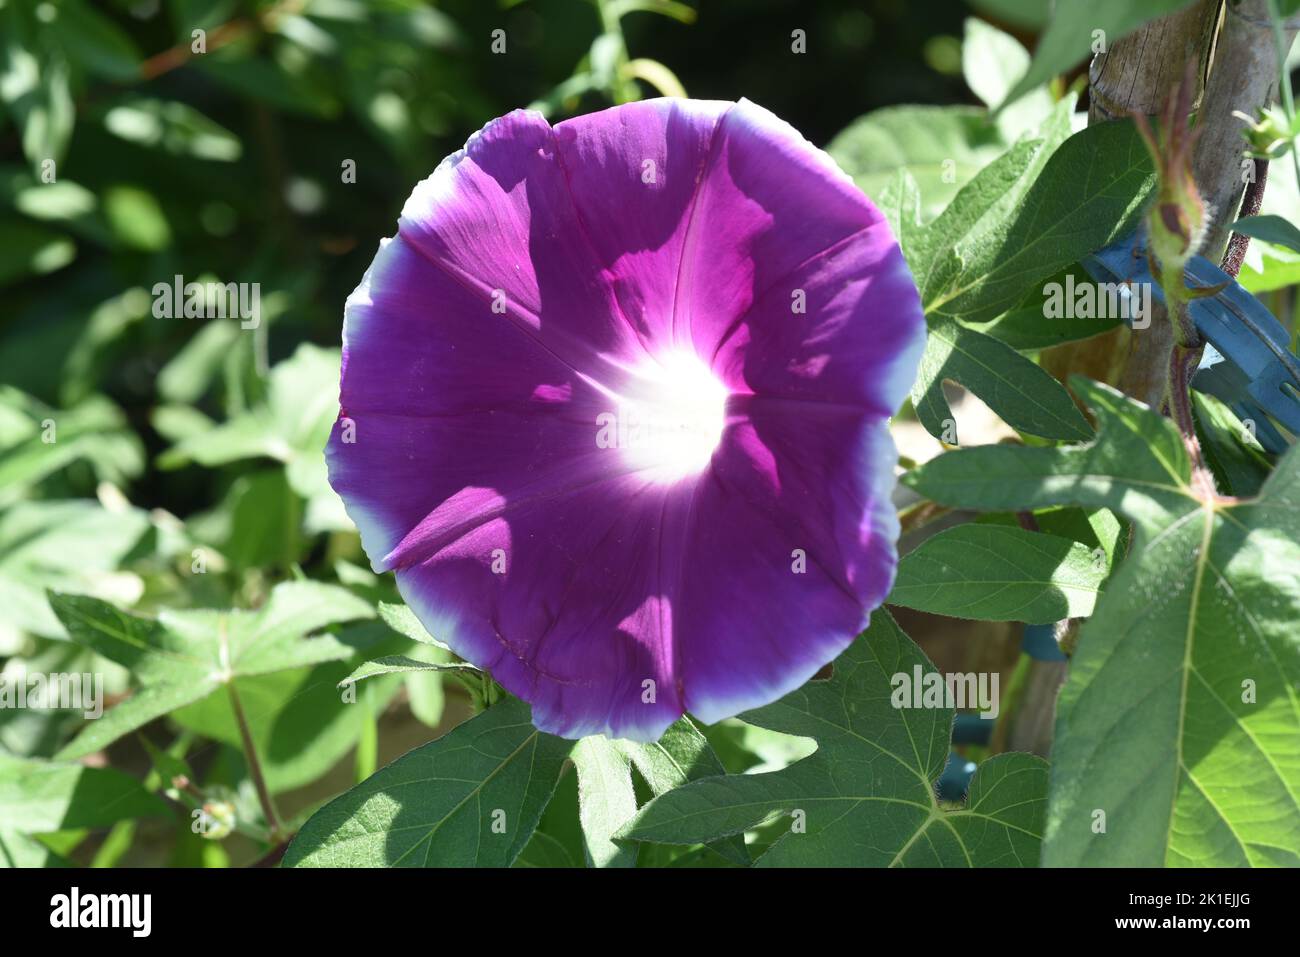 Tricolor morning glory, Ipomoea purpurea, tricolor, is a lovely climber to hold. Stock Photo